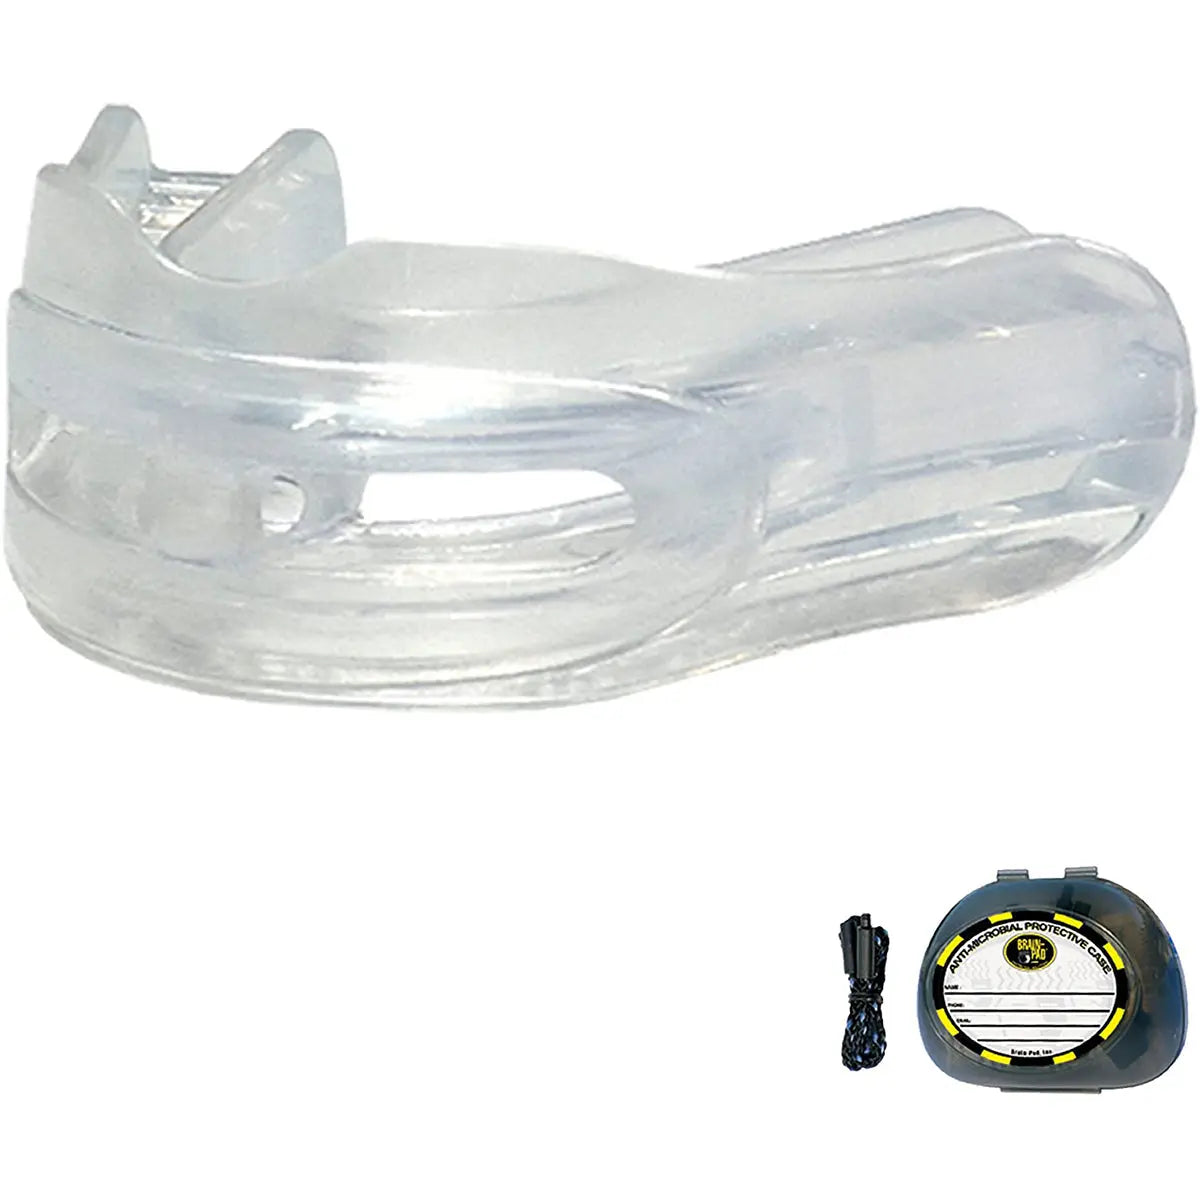 Brain Pad Double Guard Strapless Mouthguard - Clear Brain Pad